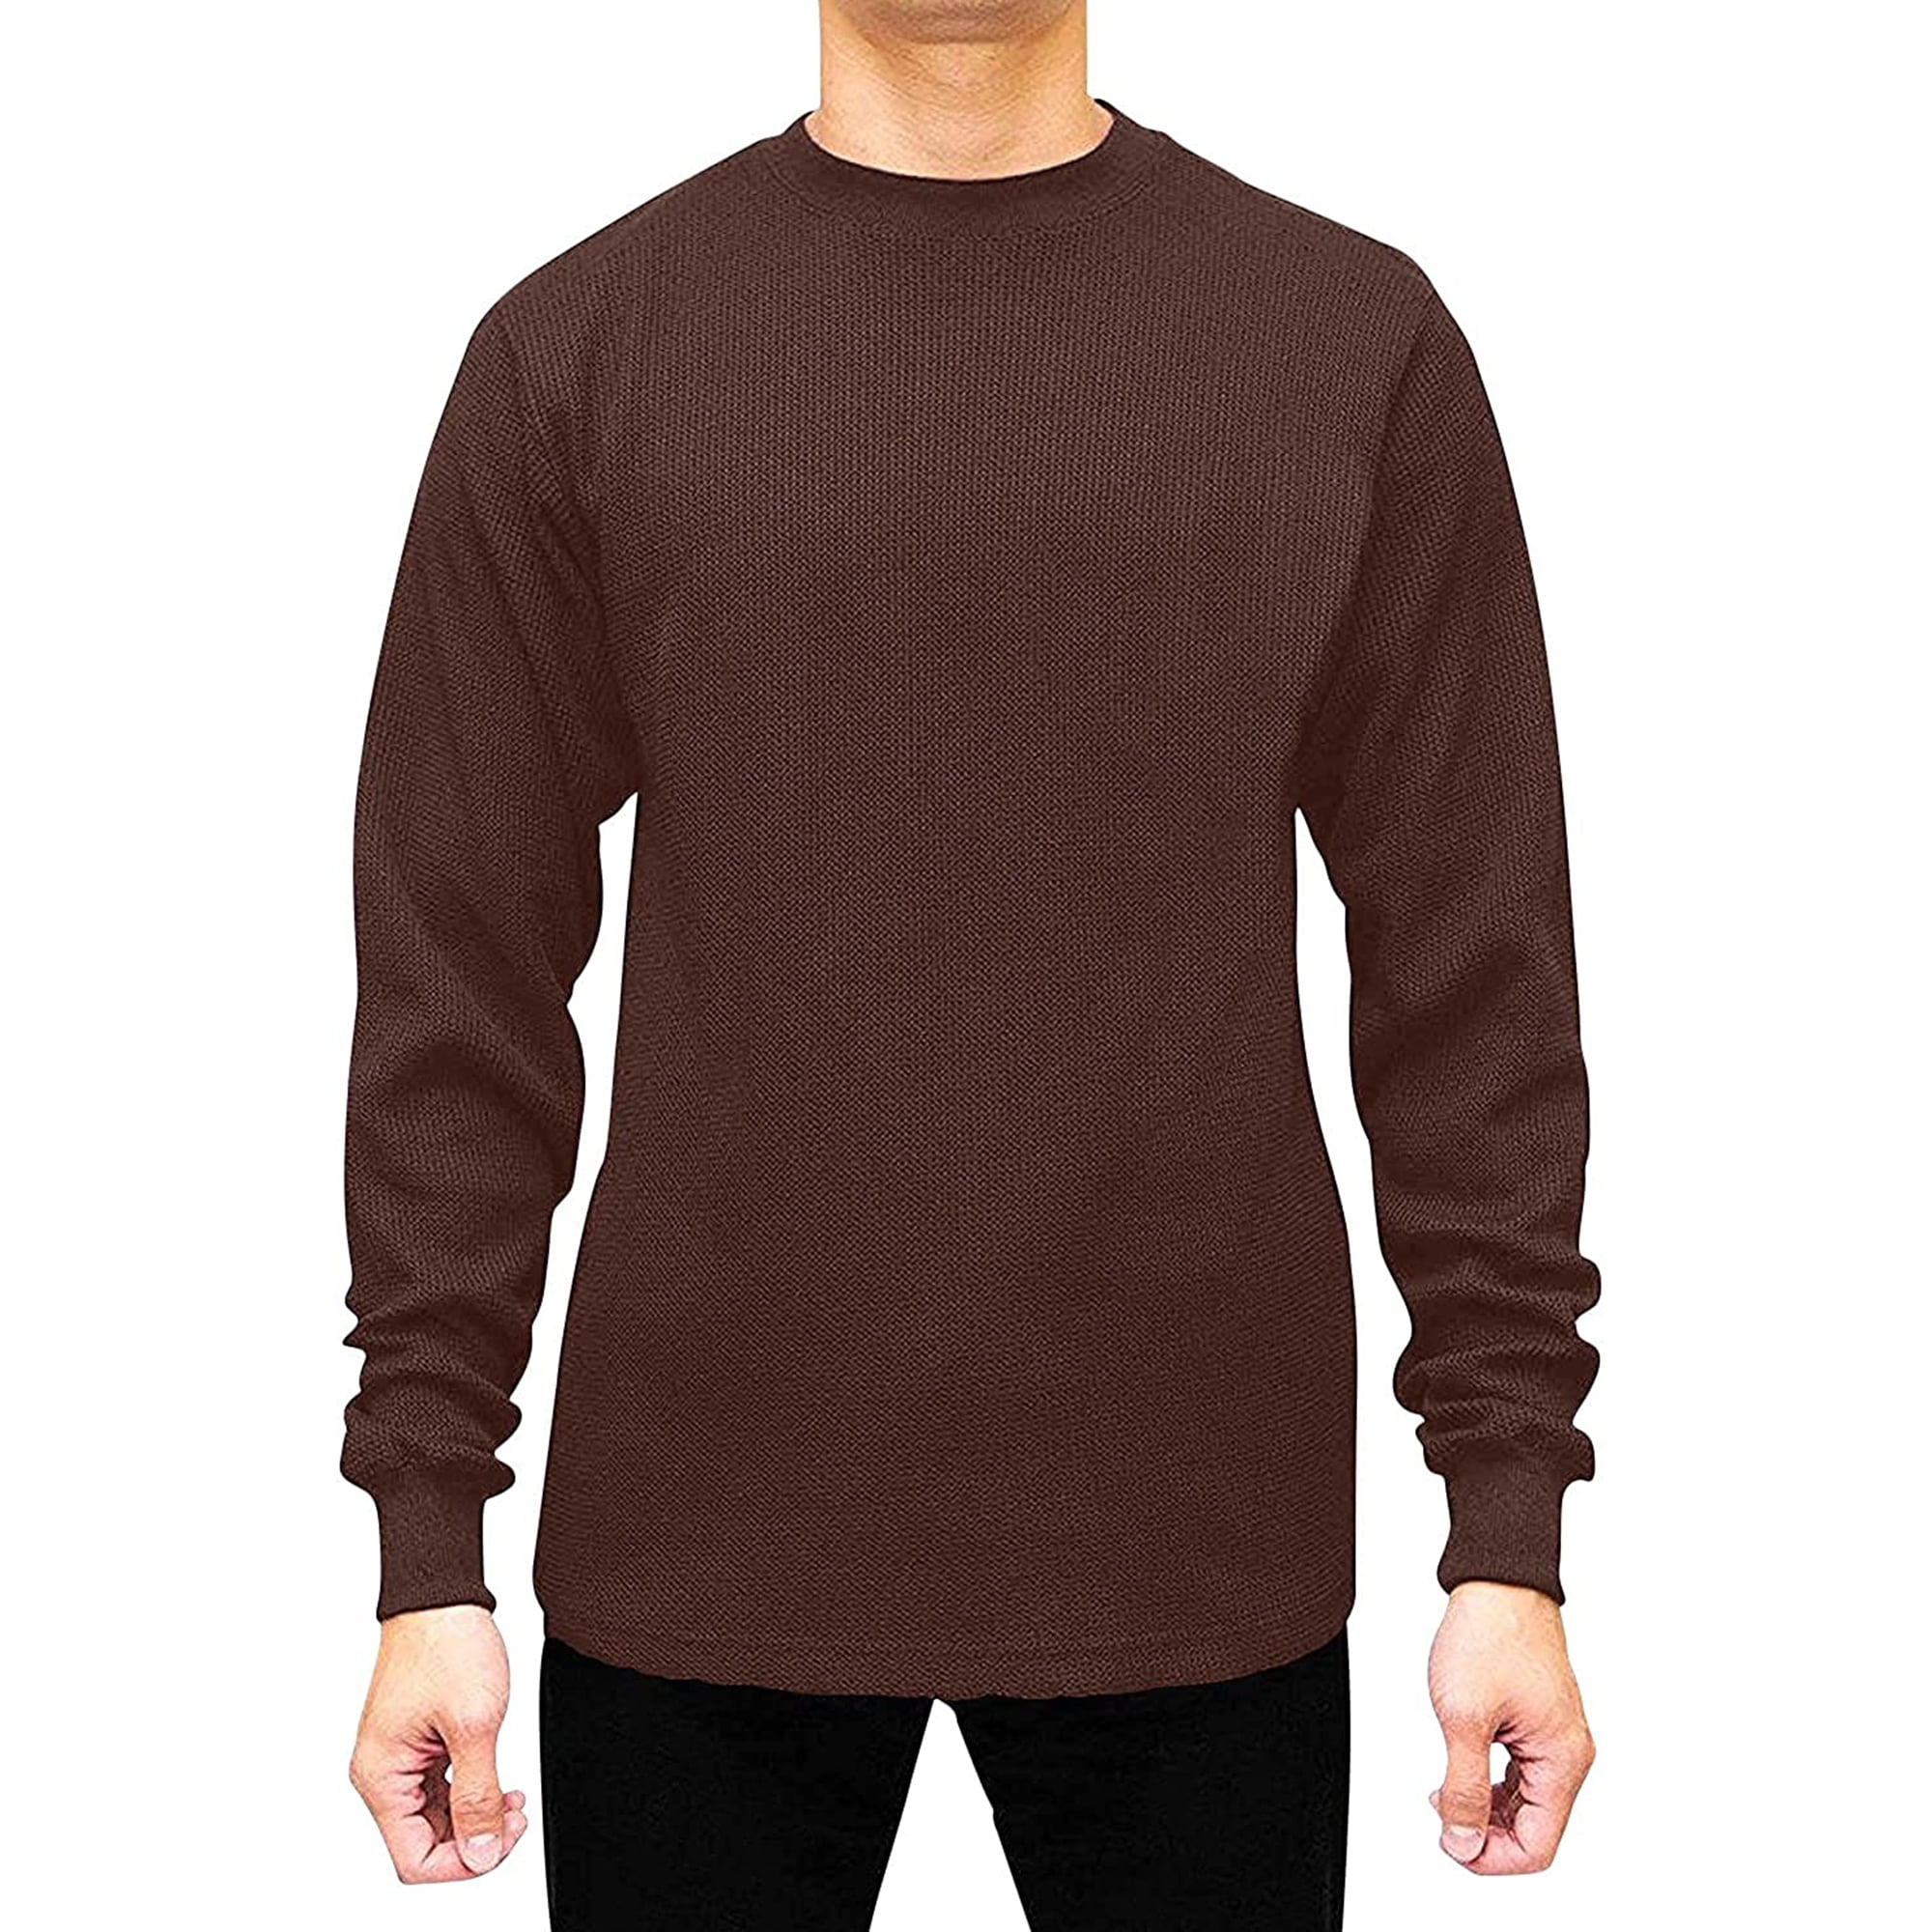 JMR USA INC Long Sleeve Men, Waffle for Small Shirt Knit Neck Navy Crew Thermal